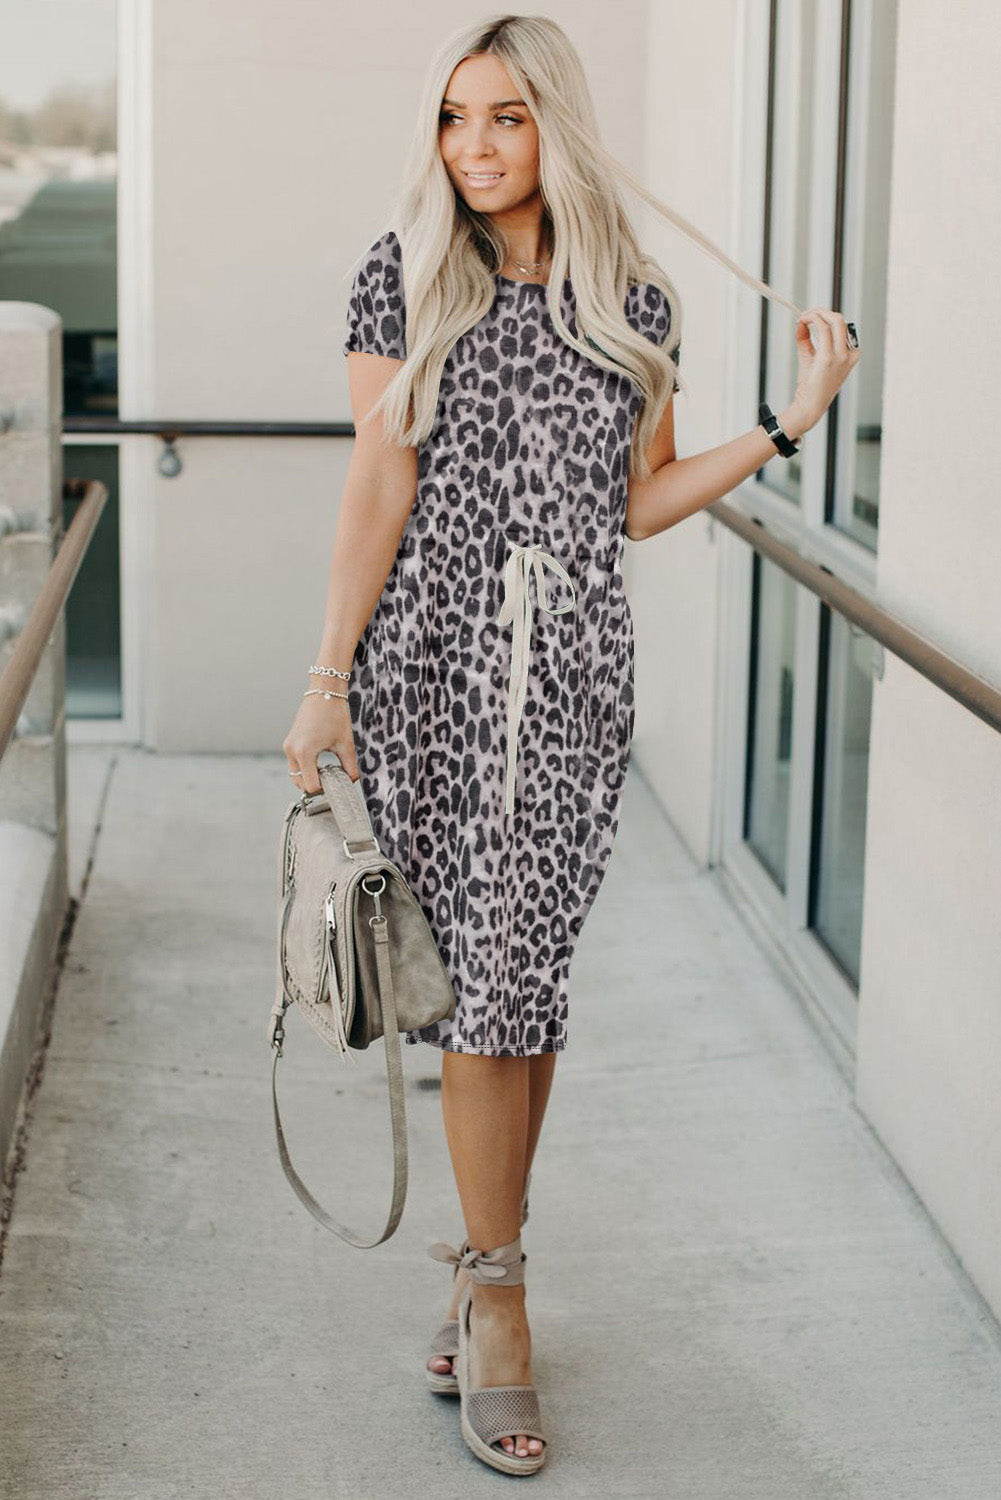 Leopard Short Sleeve Pocketed Drawstring Casual Dress